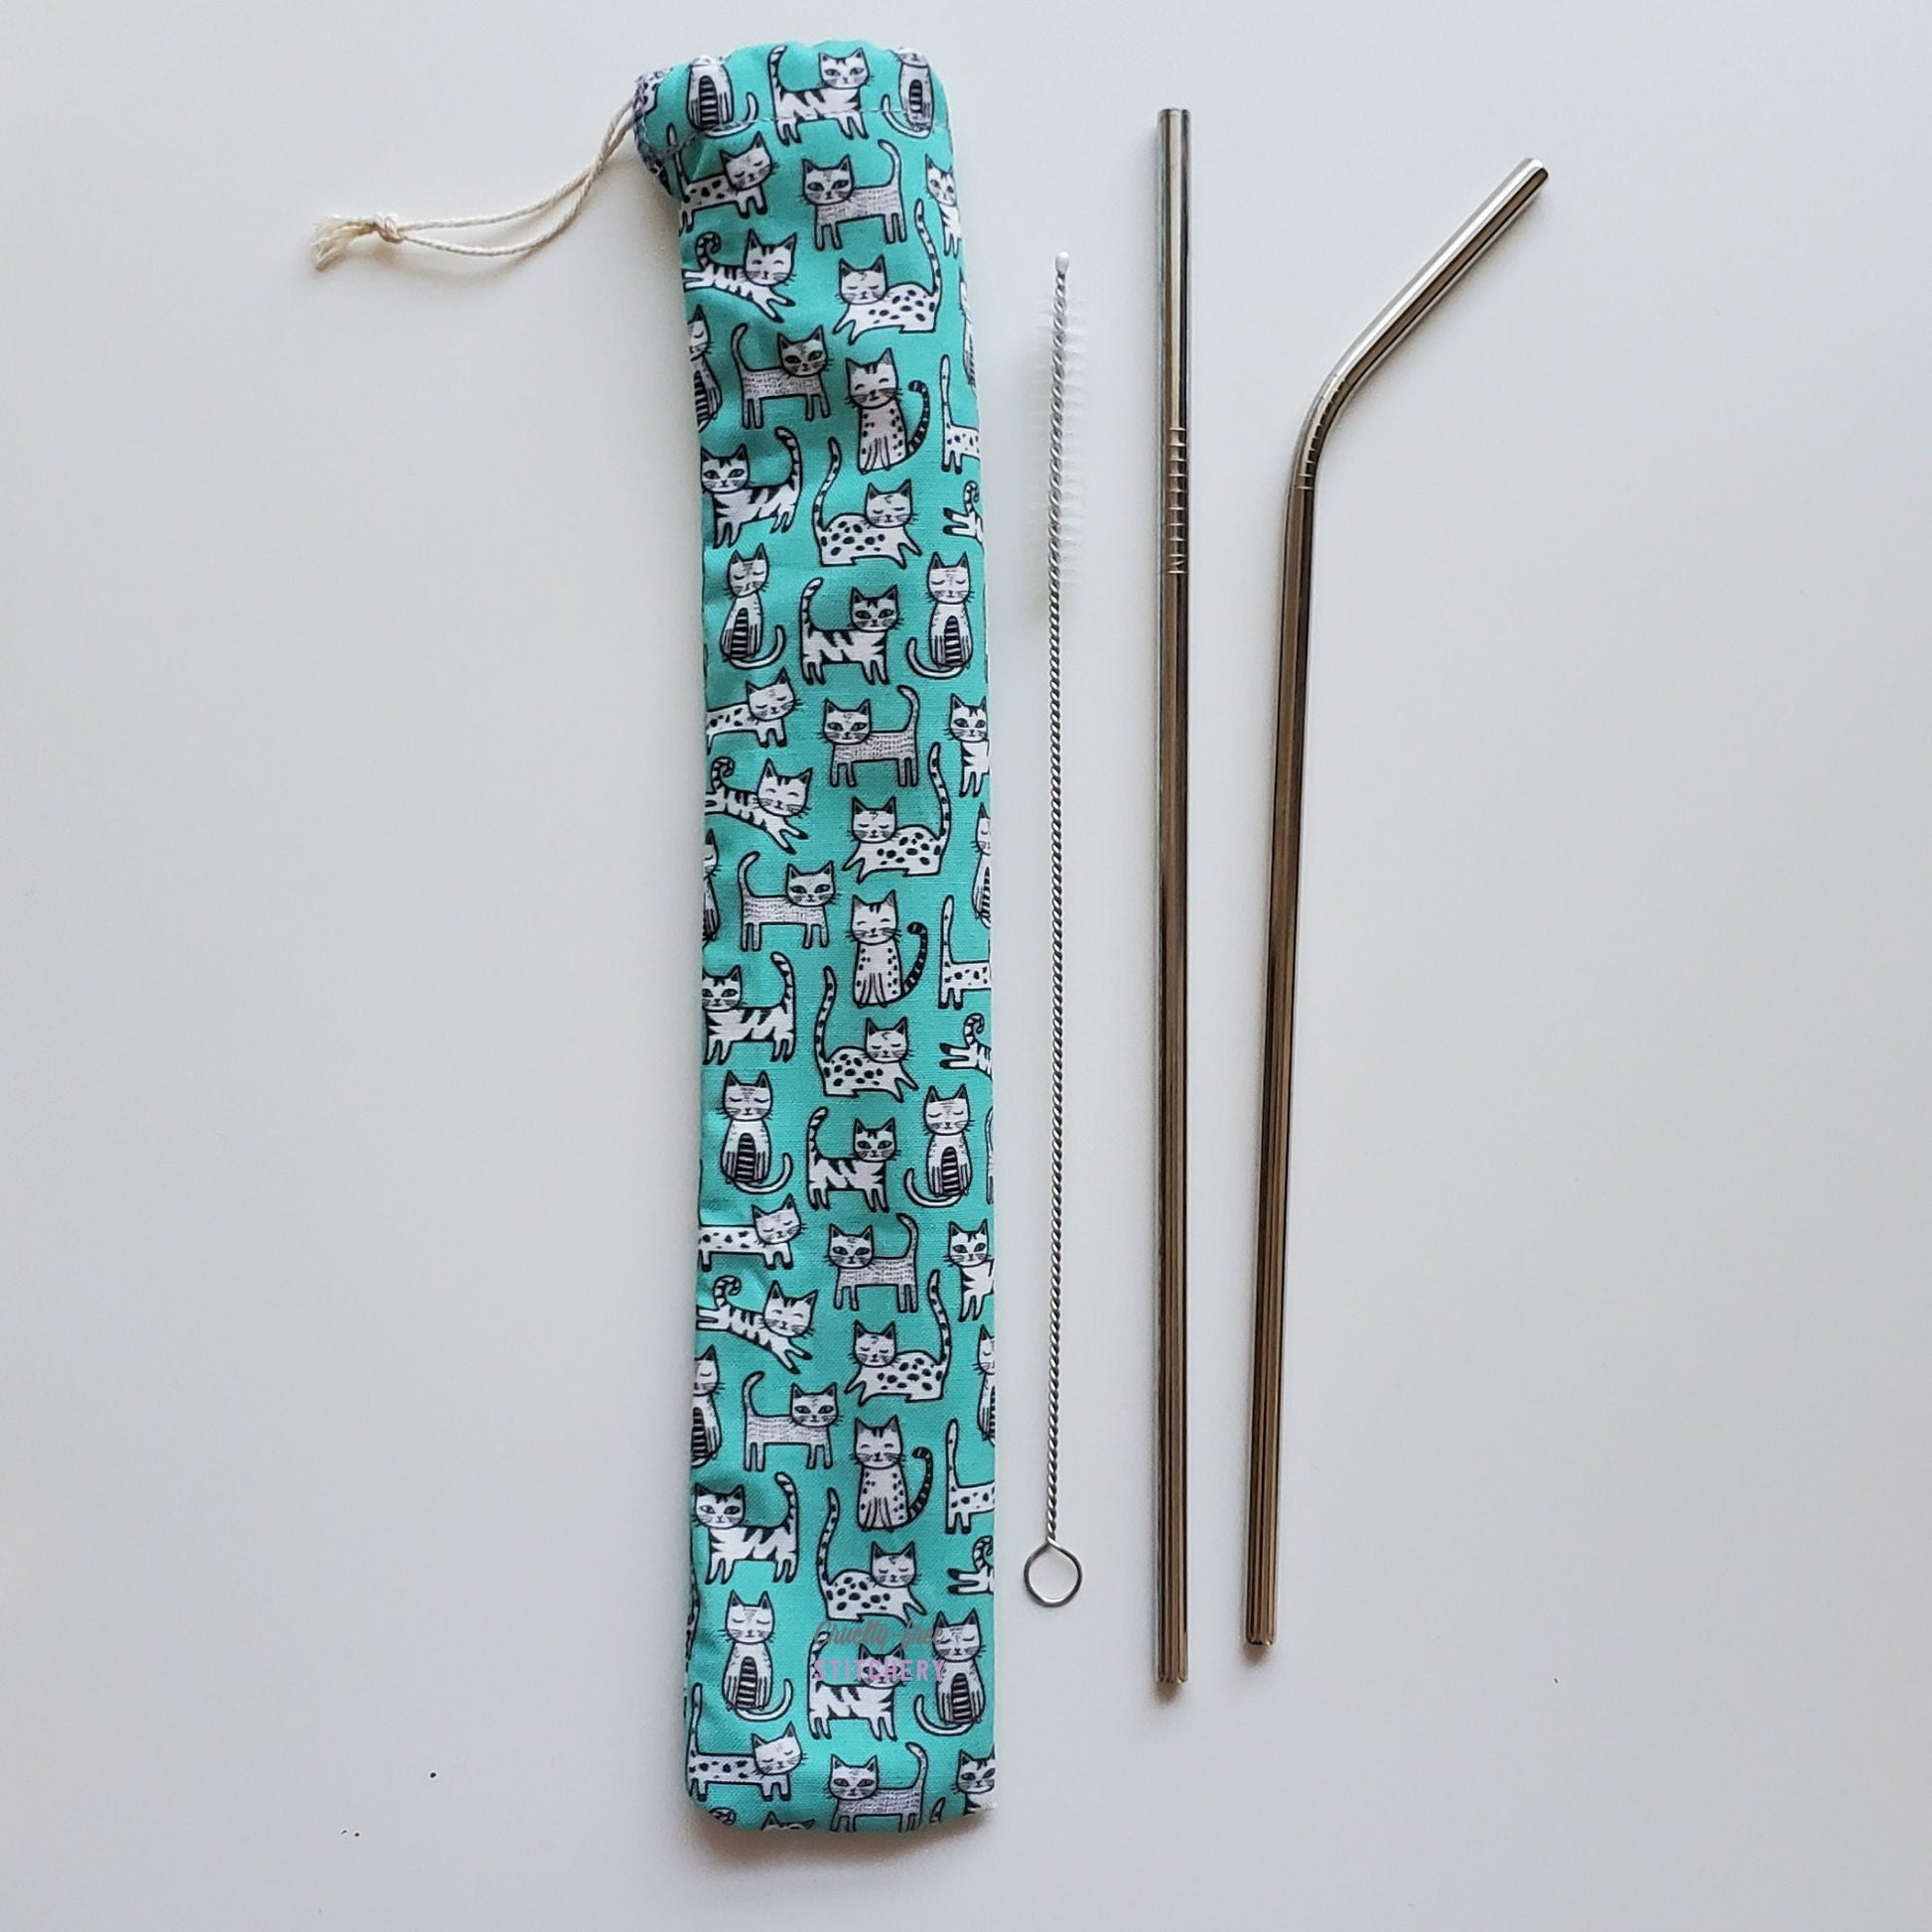 Reusable straw pouch in the same cat print laying vertically next to a straw cleaner brush, a straight stainless steel straw, and a bent stainless steel straw.